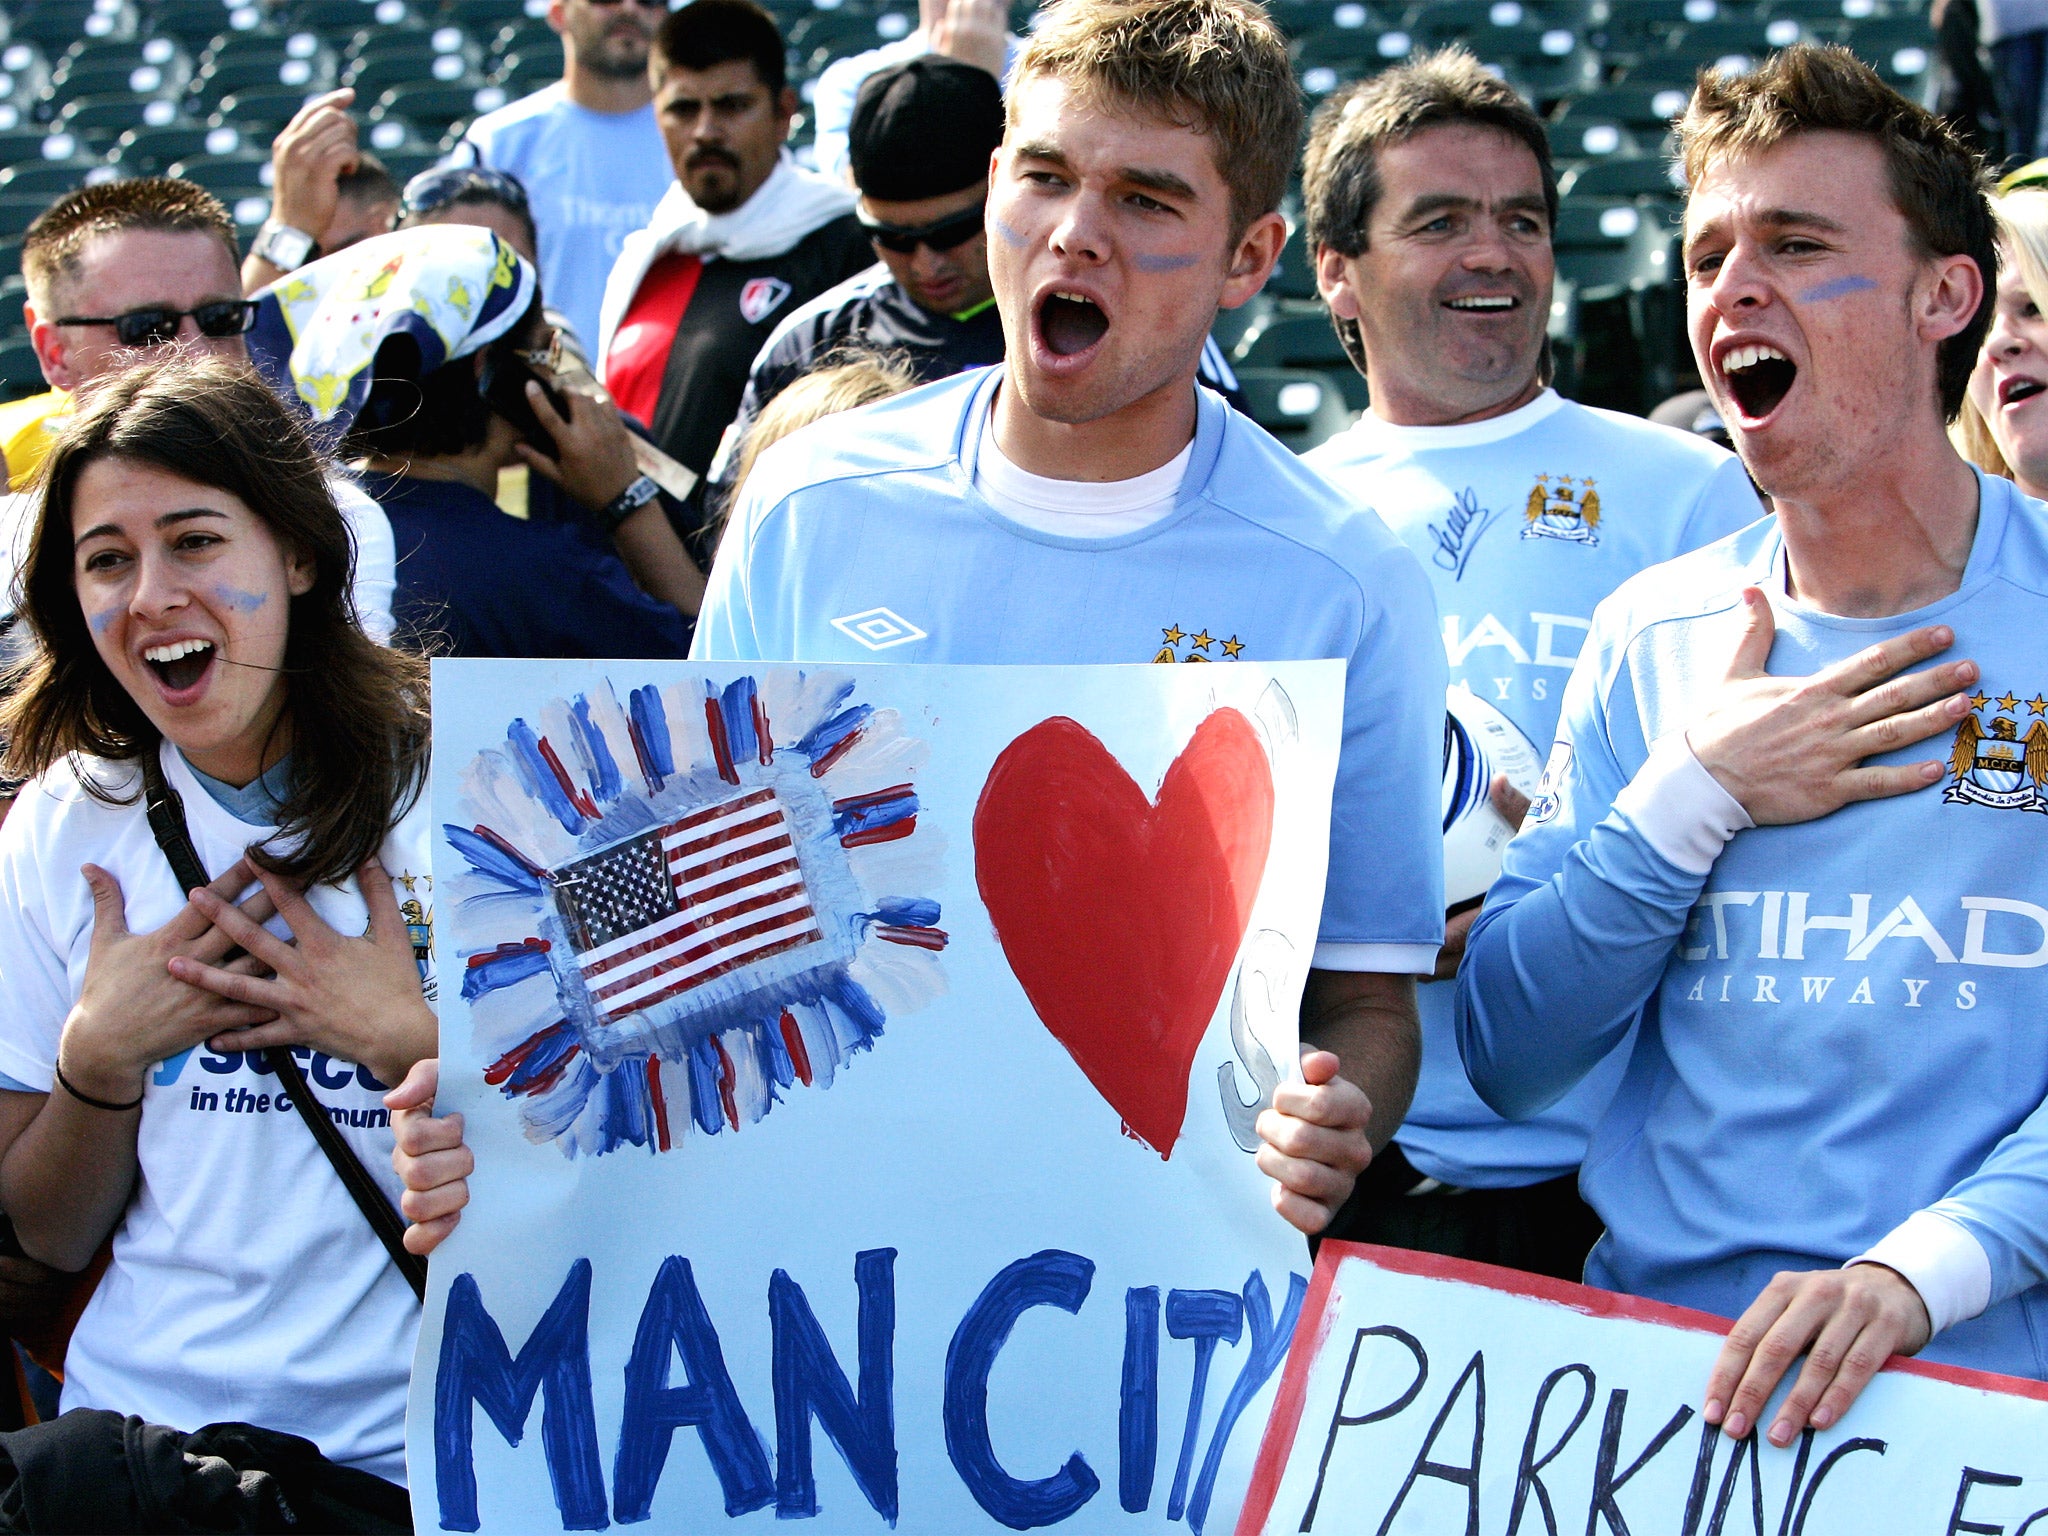 Fans in San Francisco are excited to see Manchester City play in a friendly match in 2011